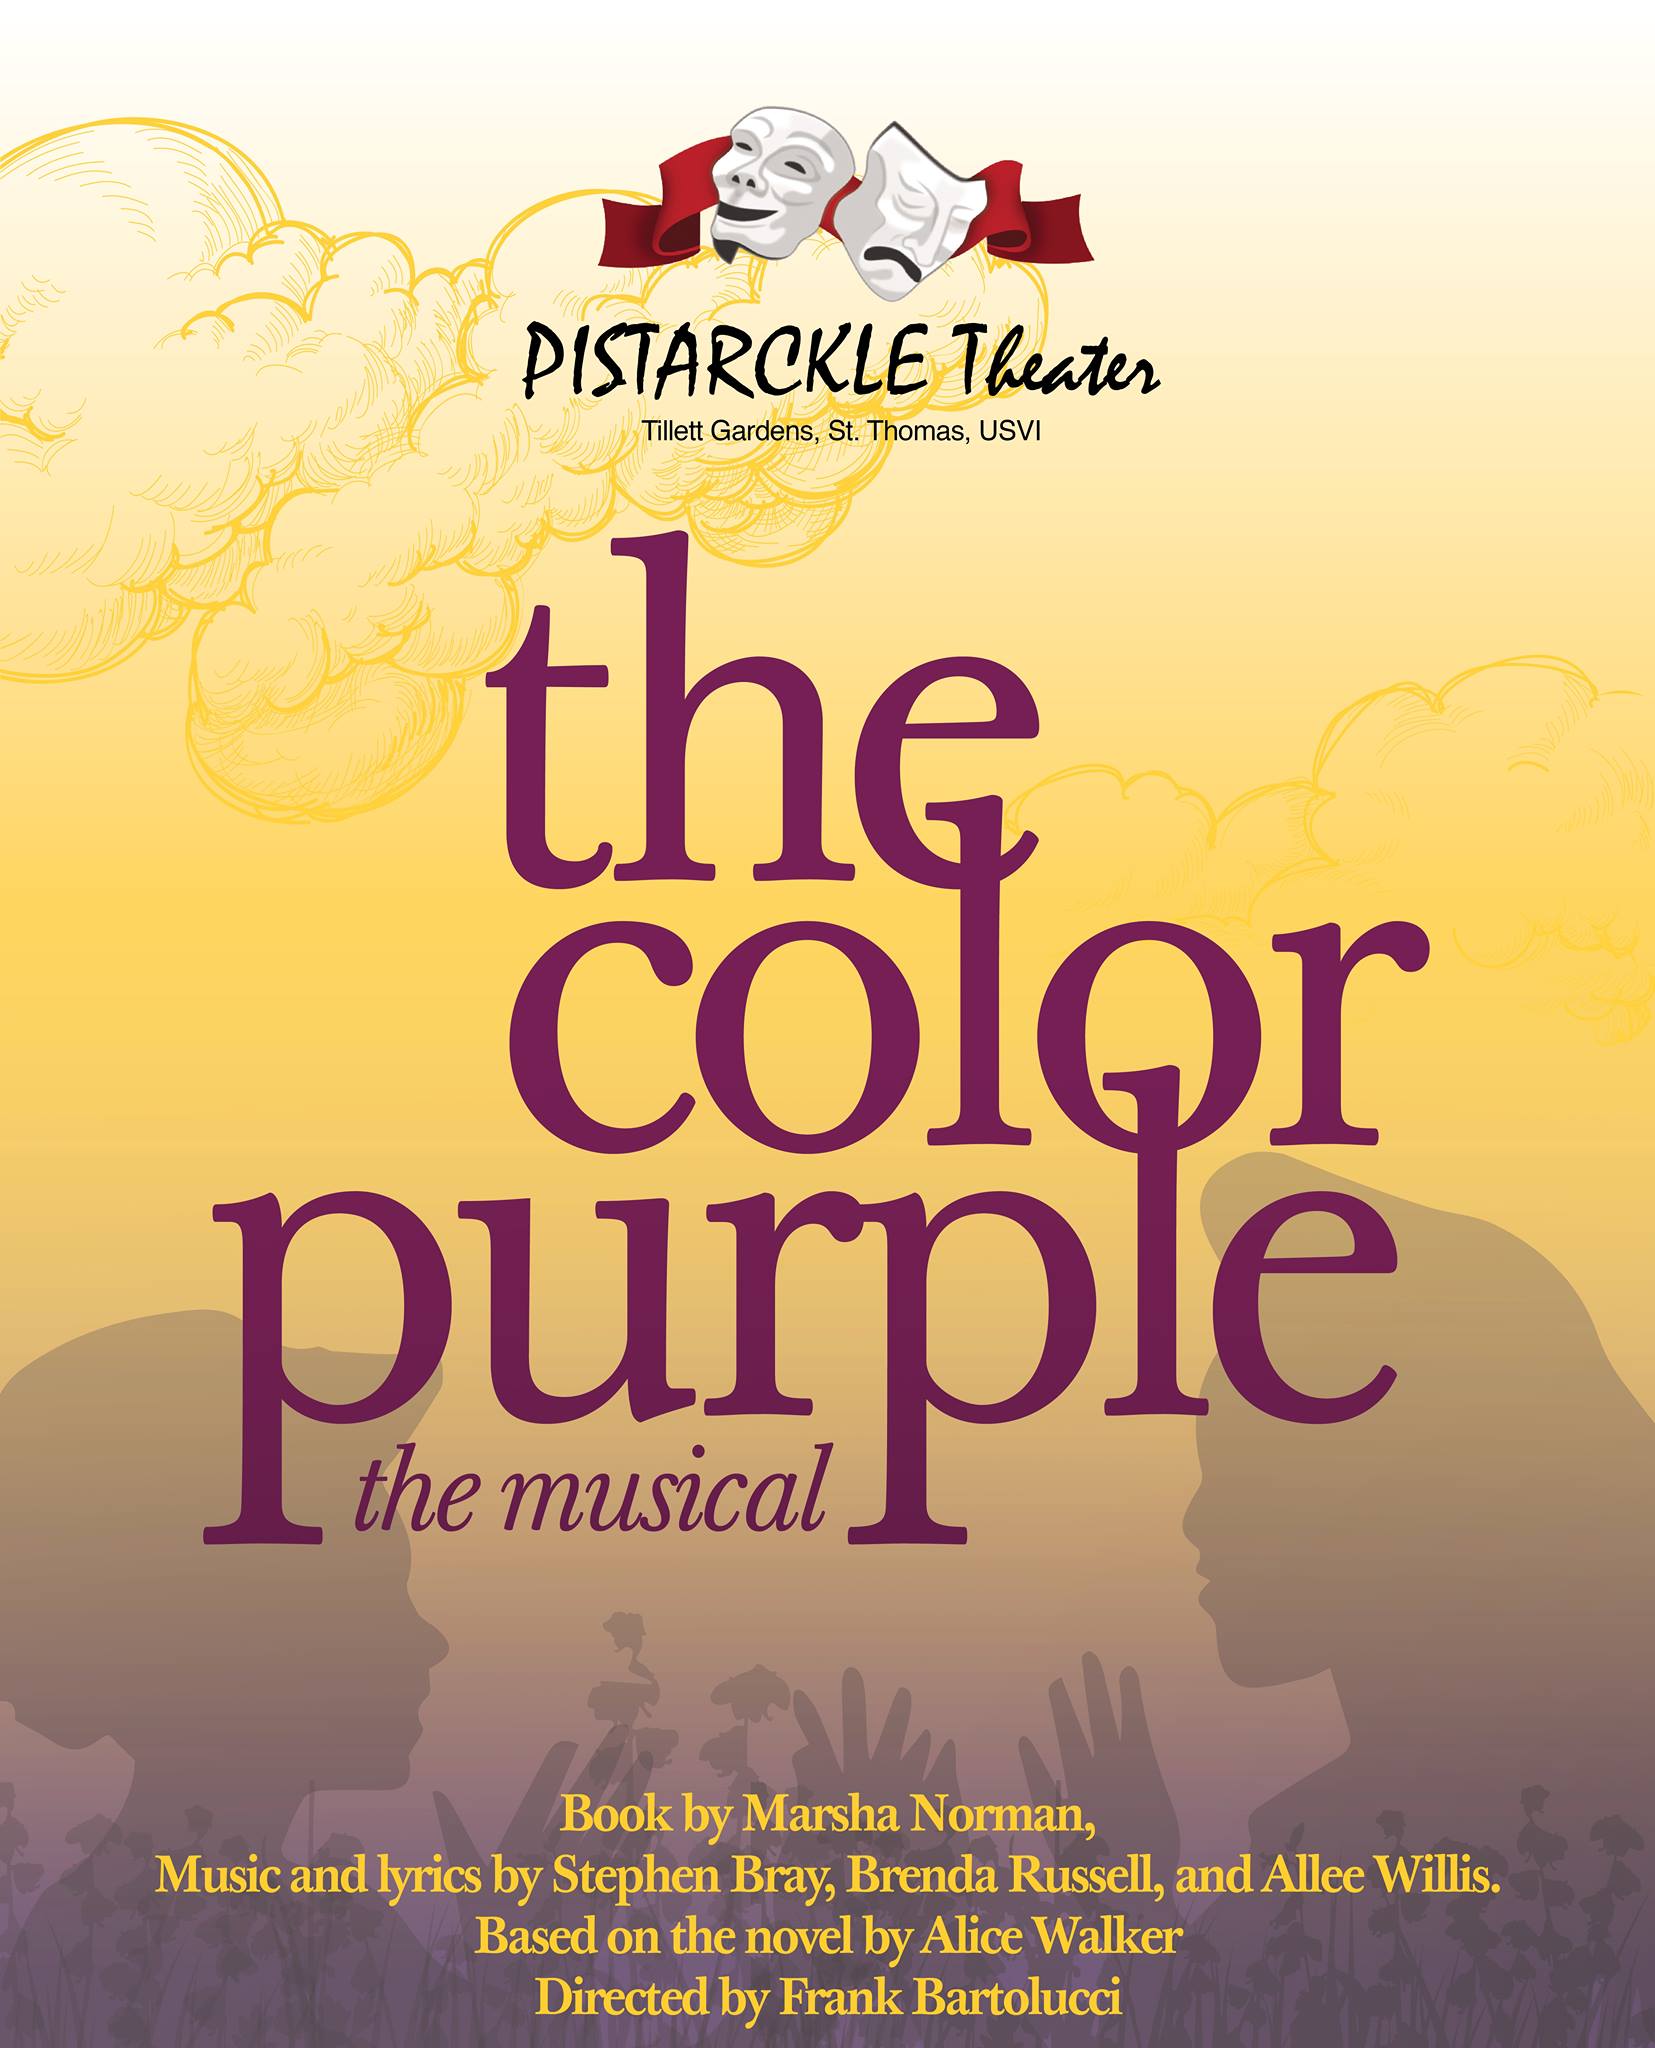 Pistarckle Theater The Color Purple - the Musical